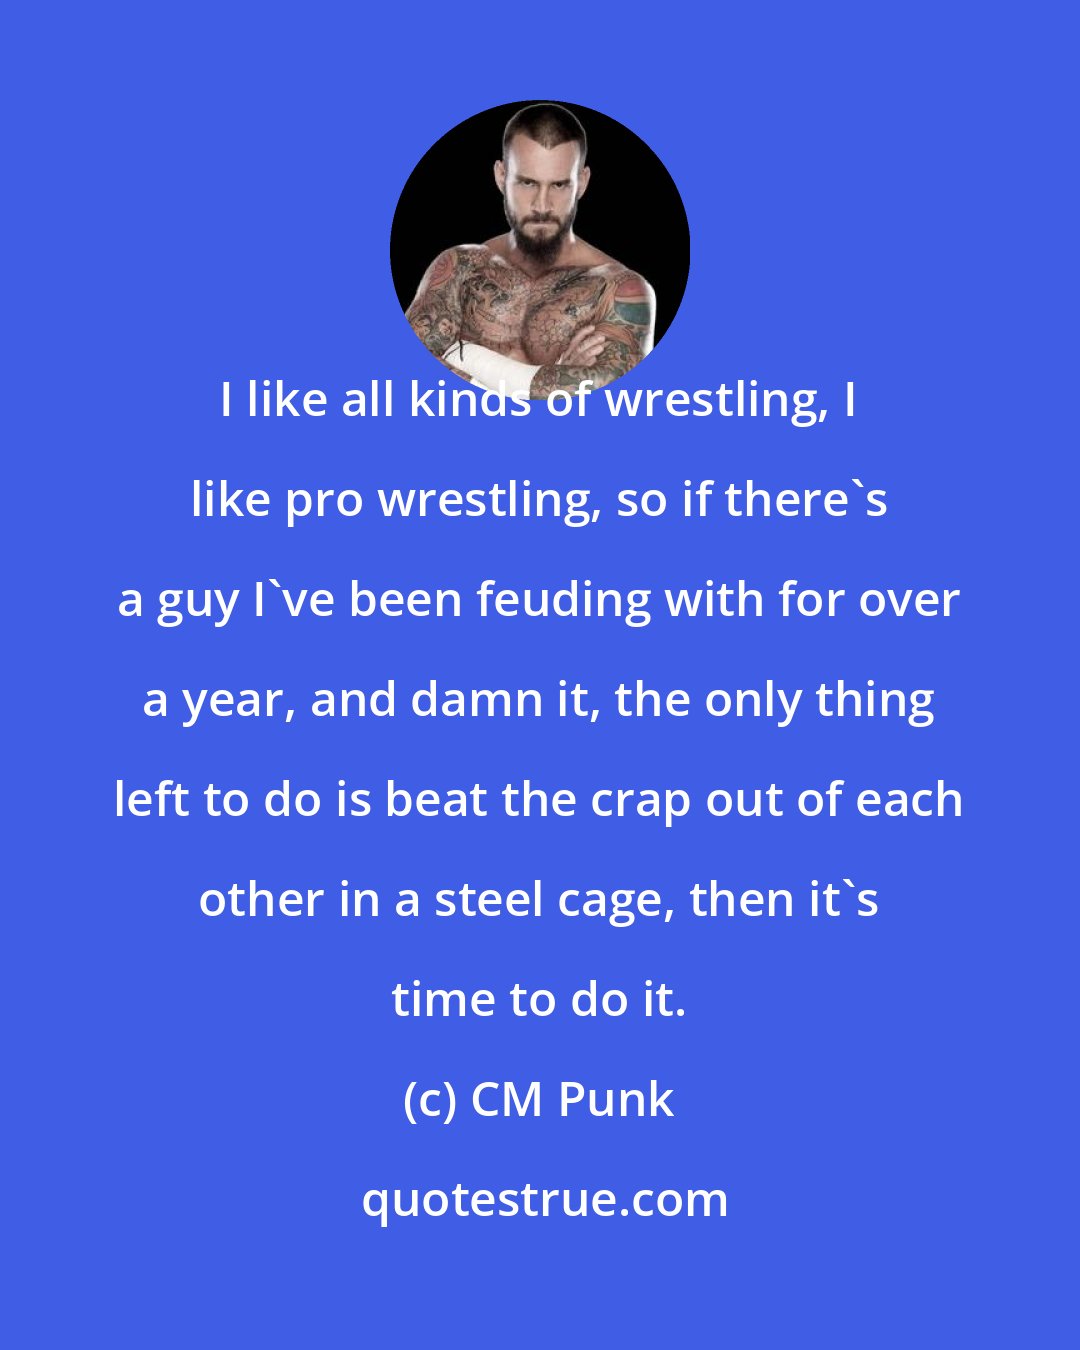 CM Punk: I like all kinds of wrestling, I like pro wrestling, so if there's a guy I've been feuding with for over a year, and damn it, the only thing left to do is beat the crap out of each other in a steel cage, then it's time to do it.